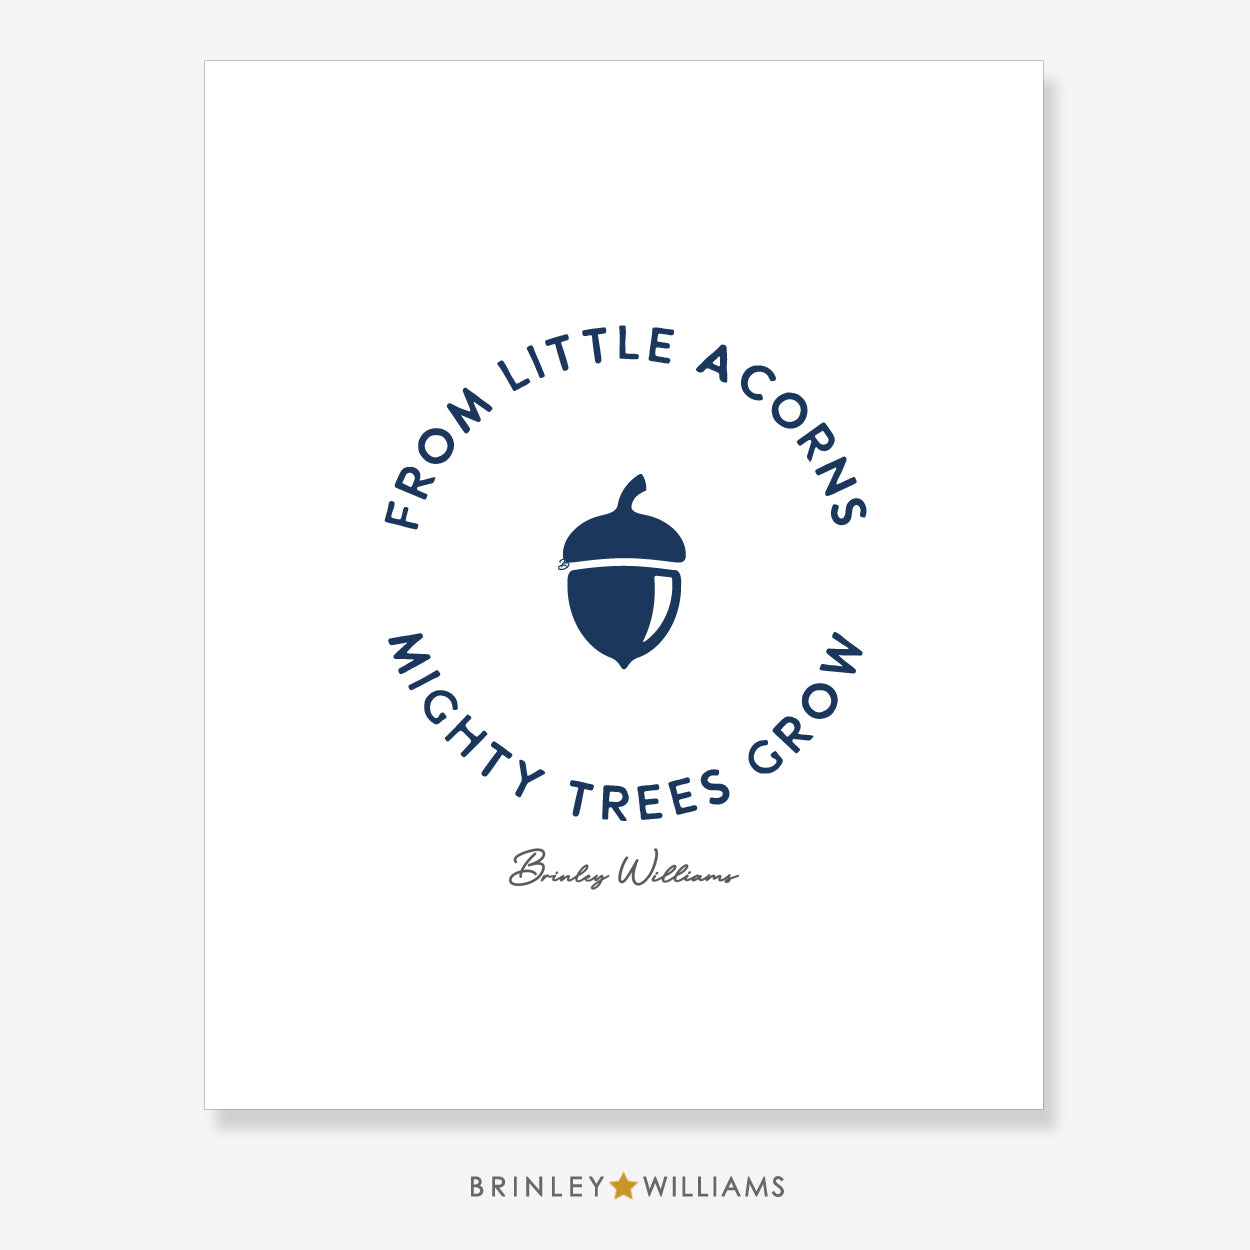 From little acorns mighty trees grow Wall Art Poster - Navy